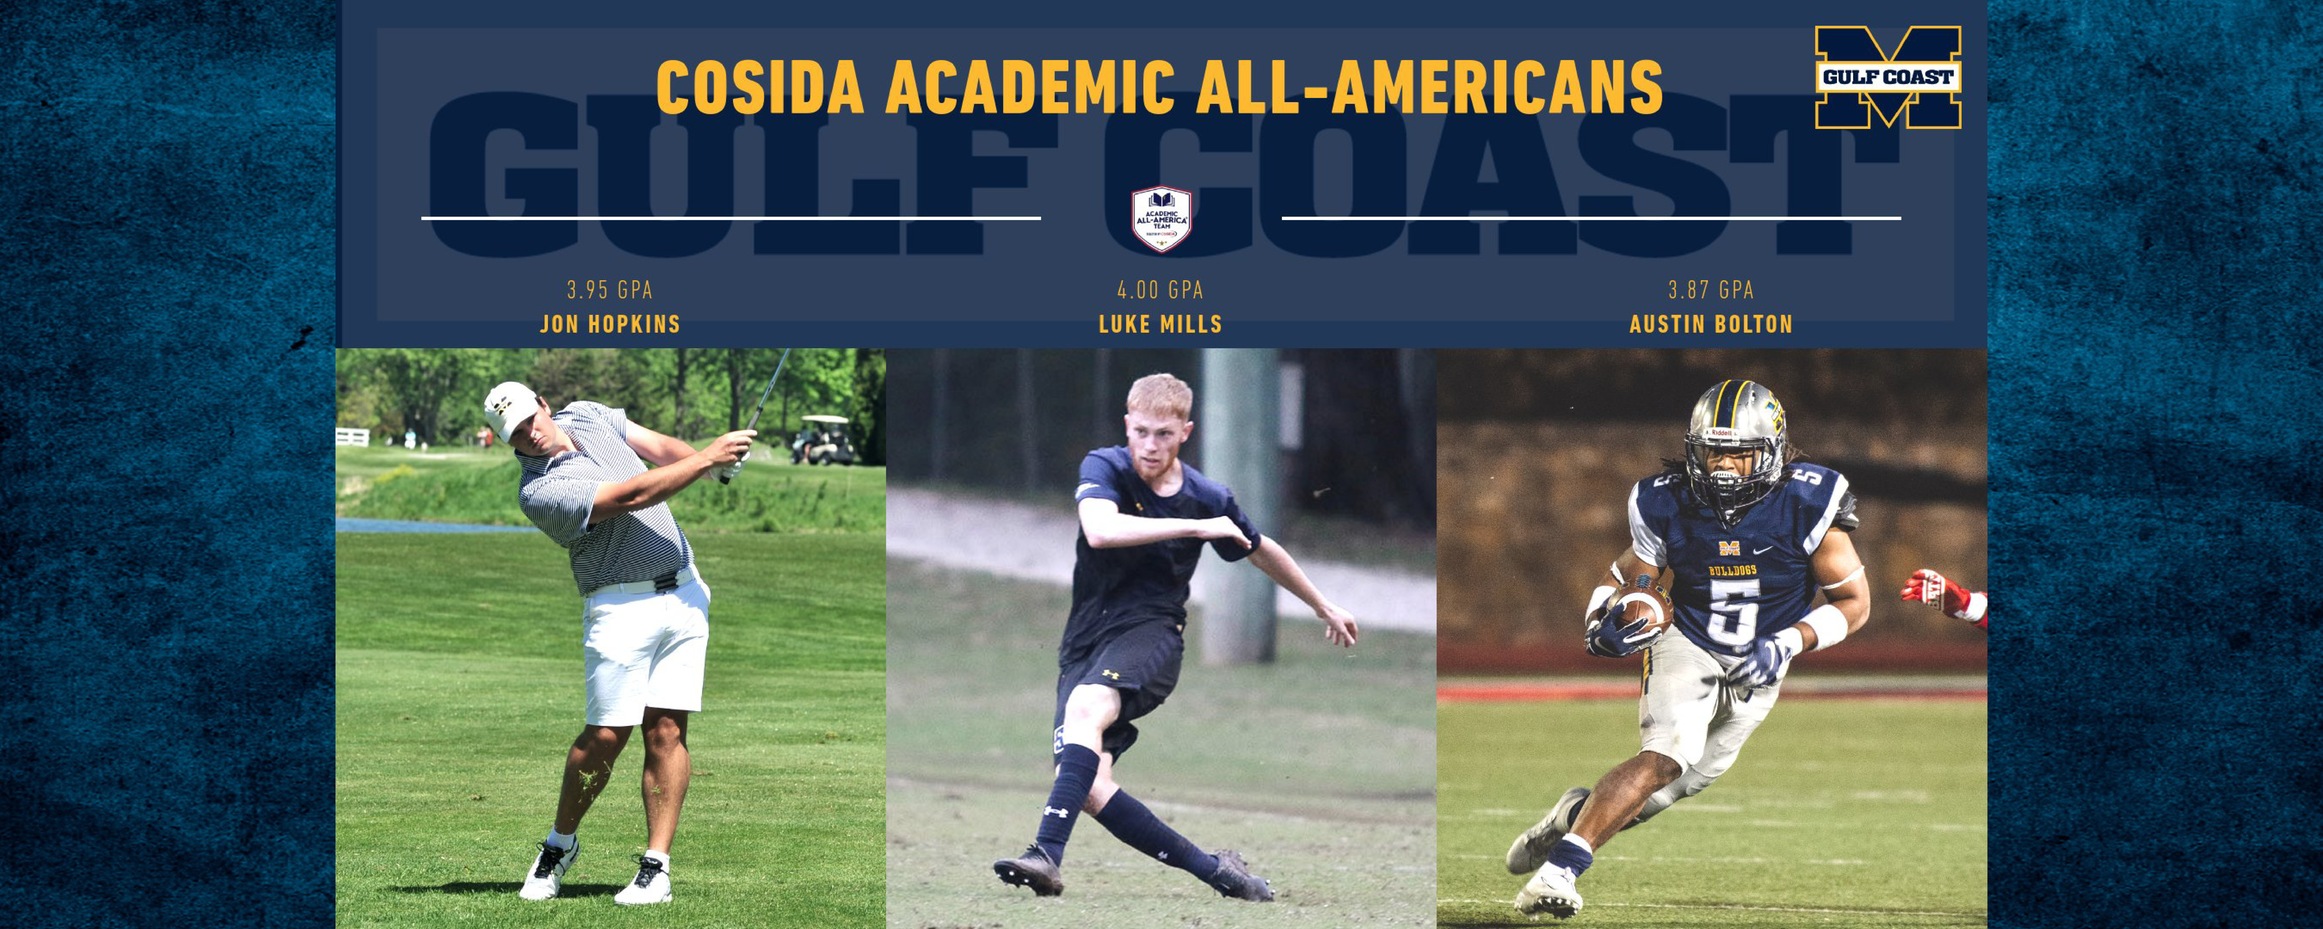 Hopkins wins Academic All-America of the Year, leads 3 Bulldogs on AAA team